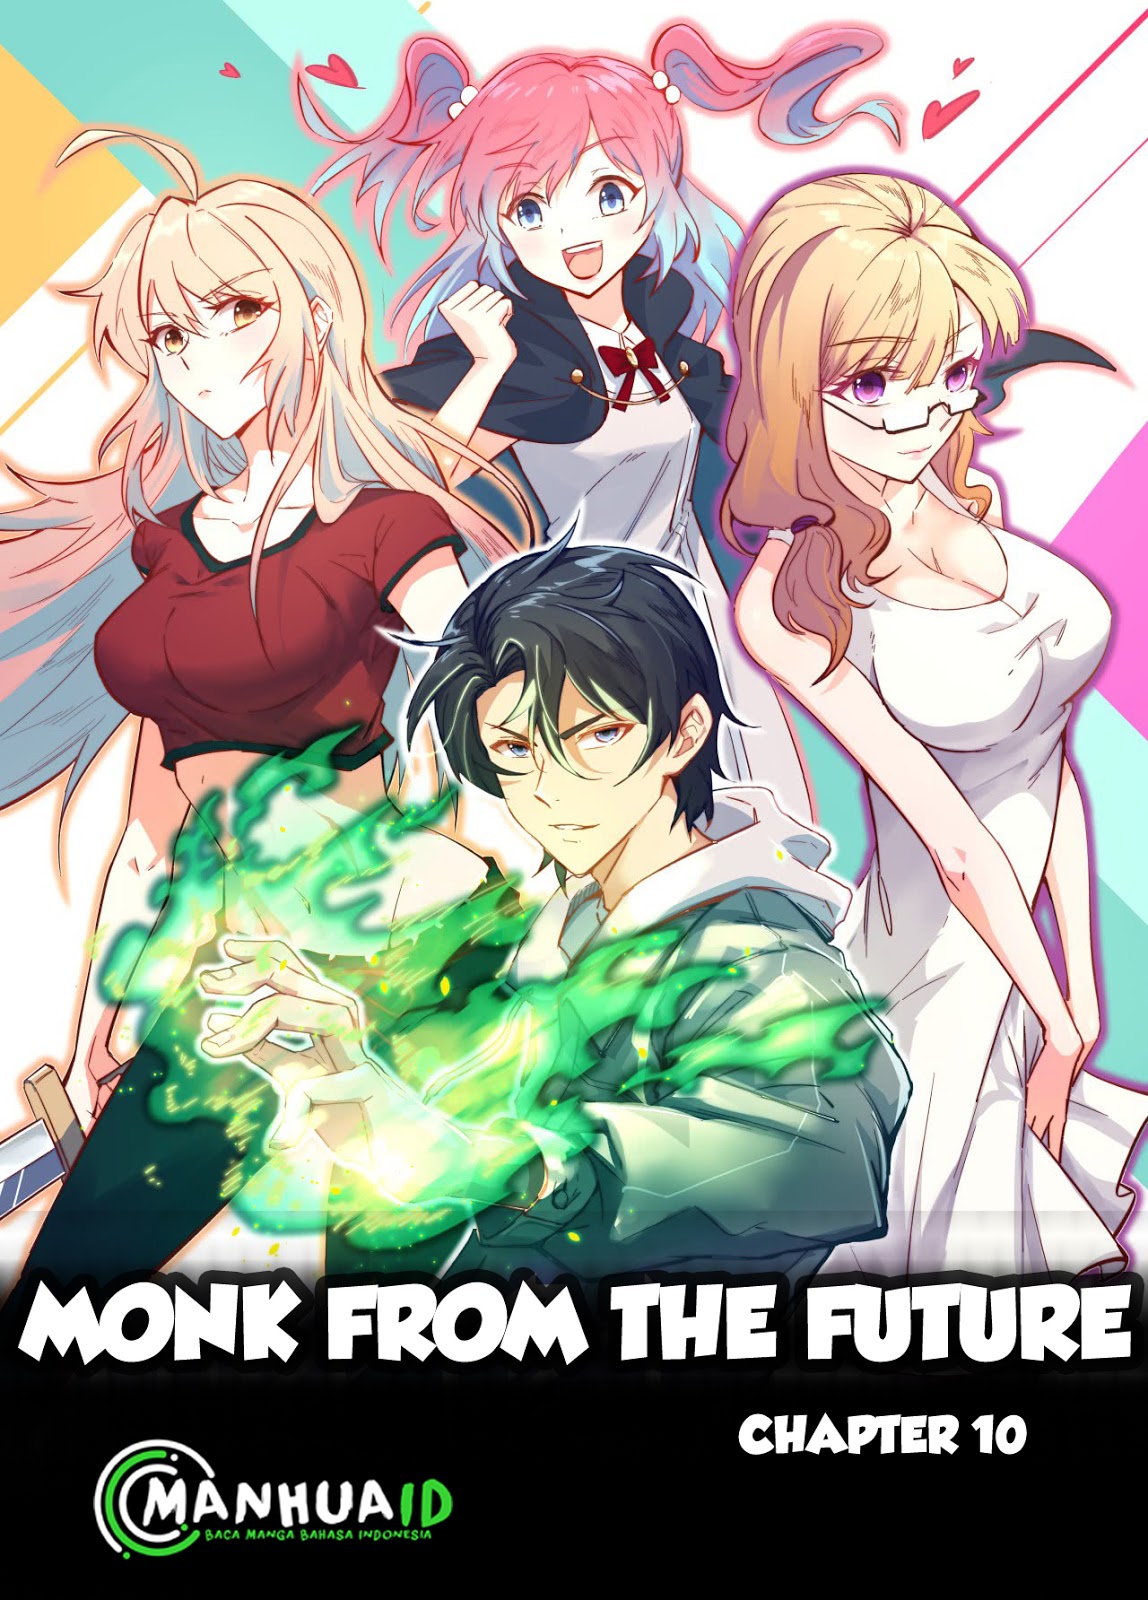 Monk From the Future Chapter 10